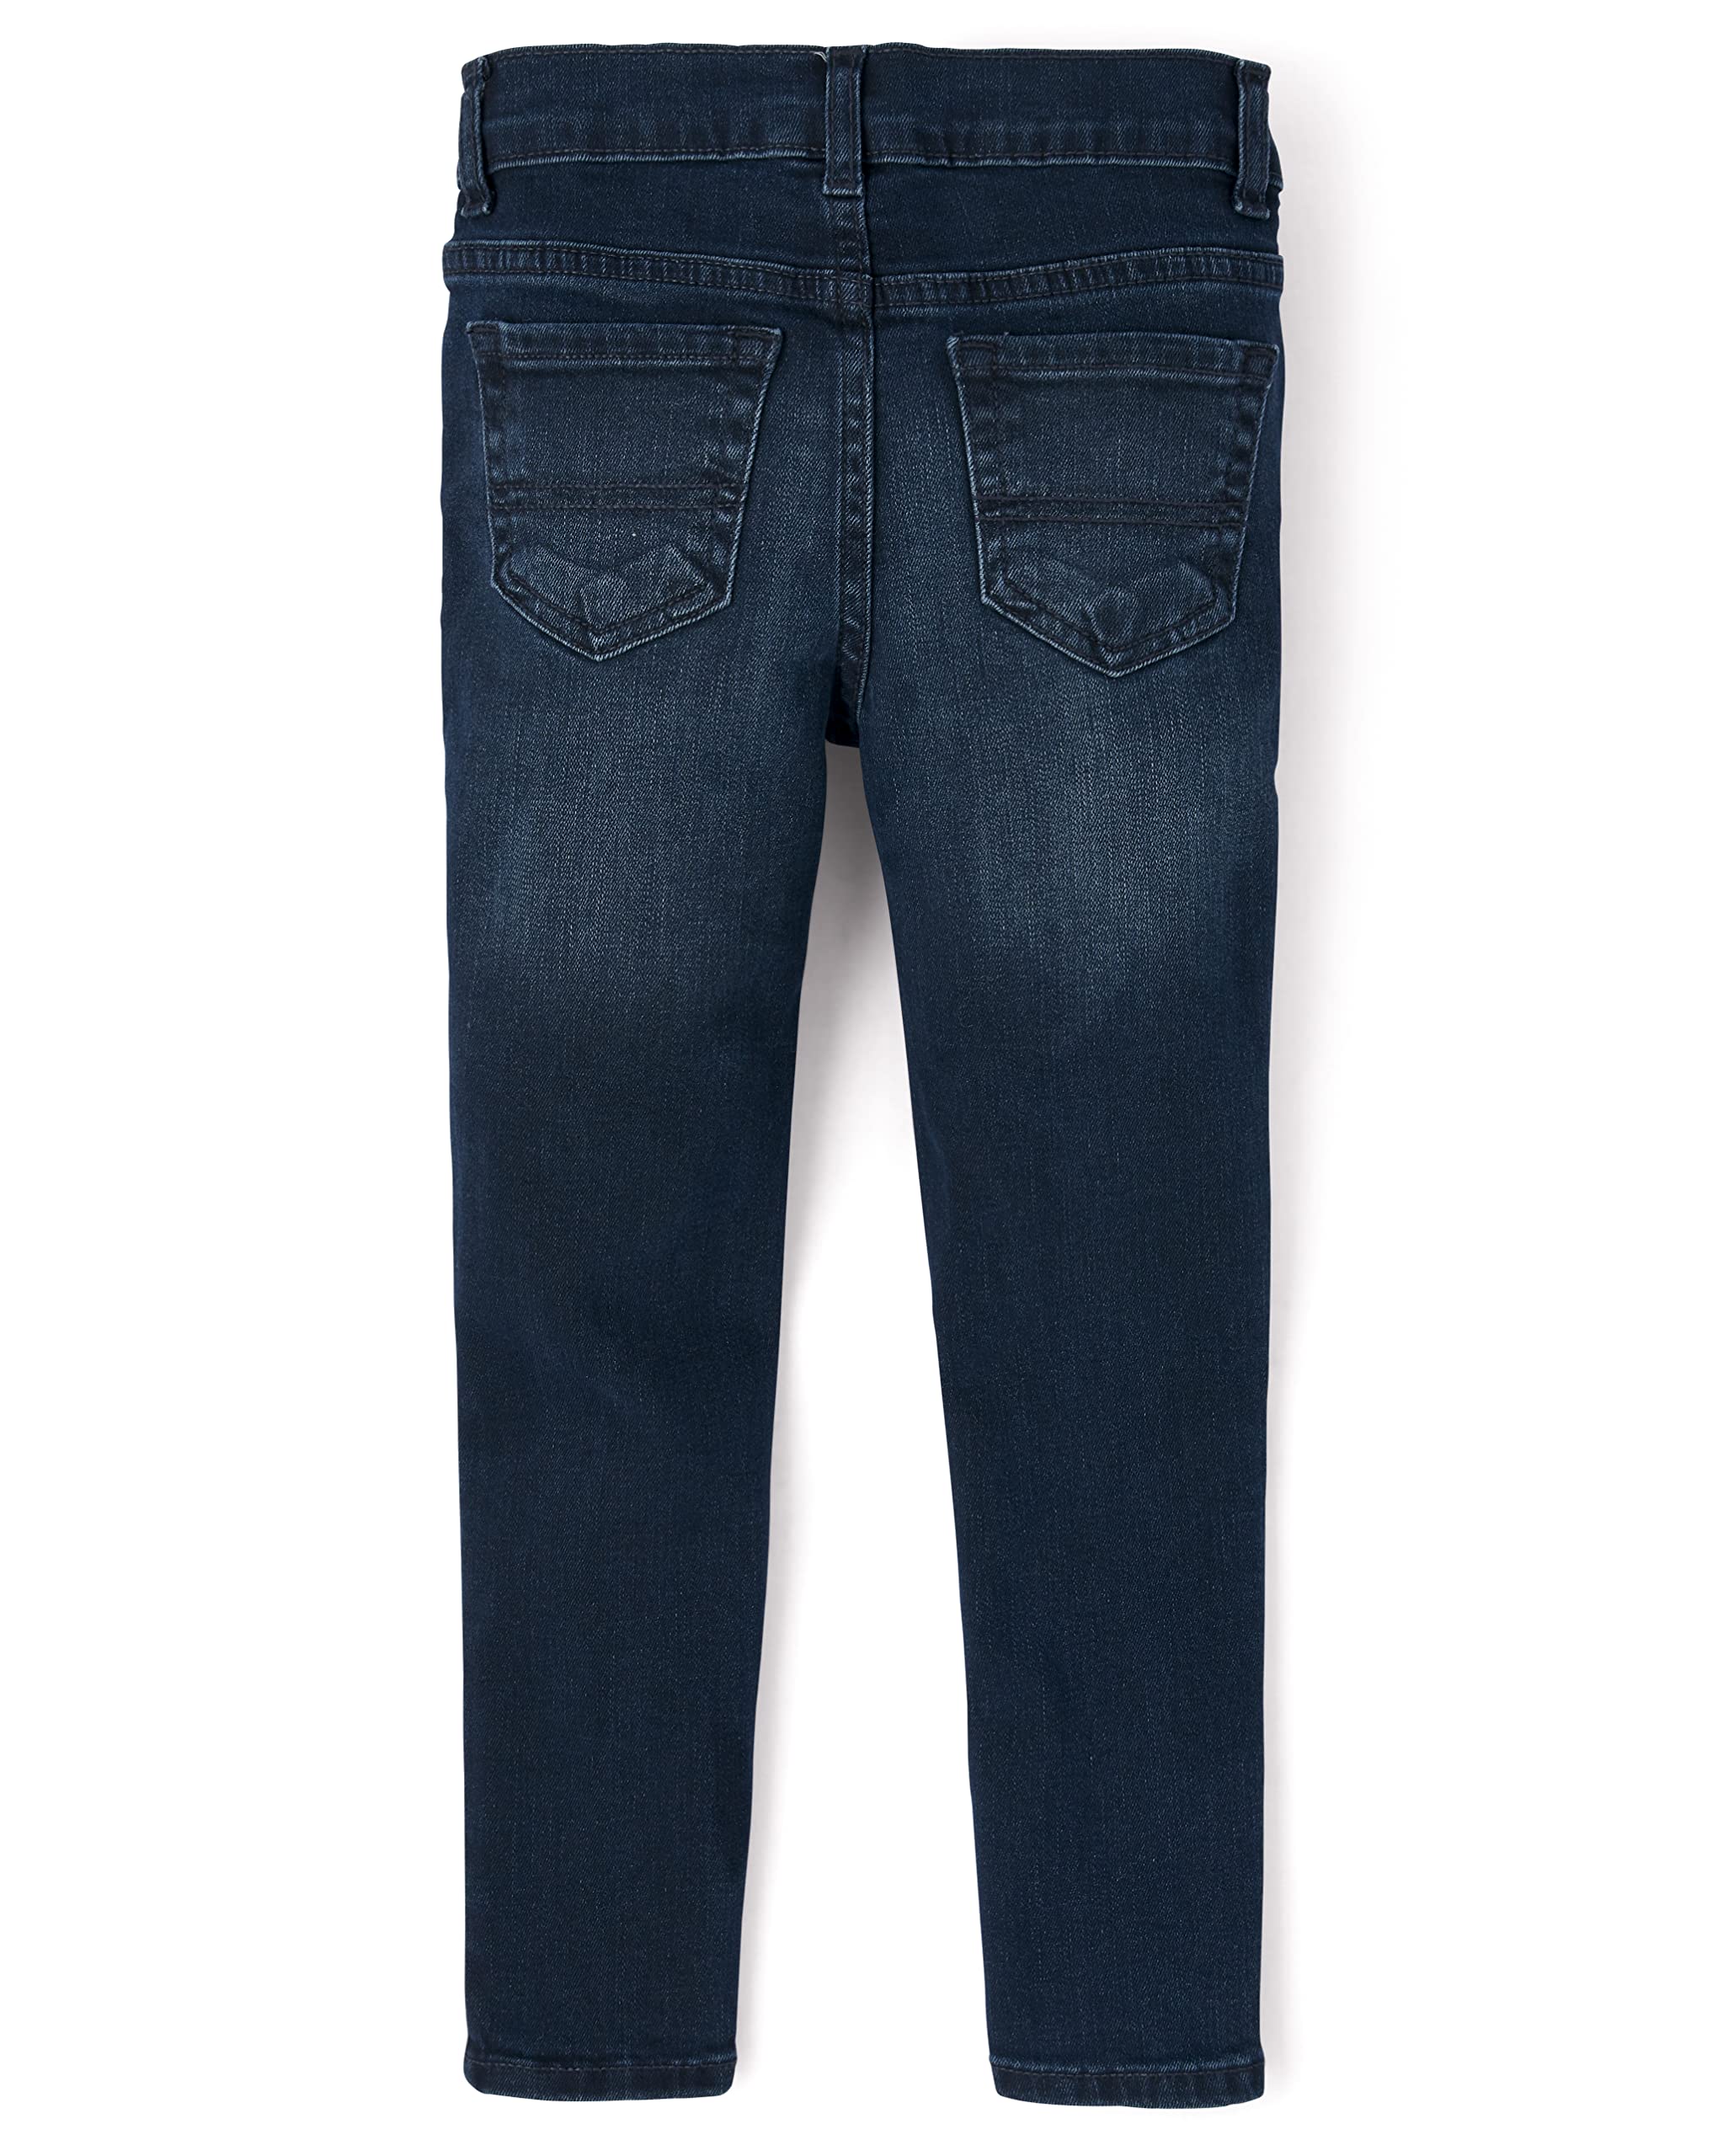 The Children's Place Boys' Stretch Skinny Jeans